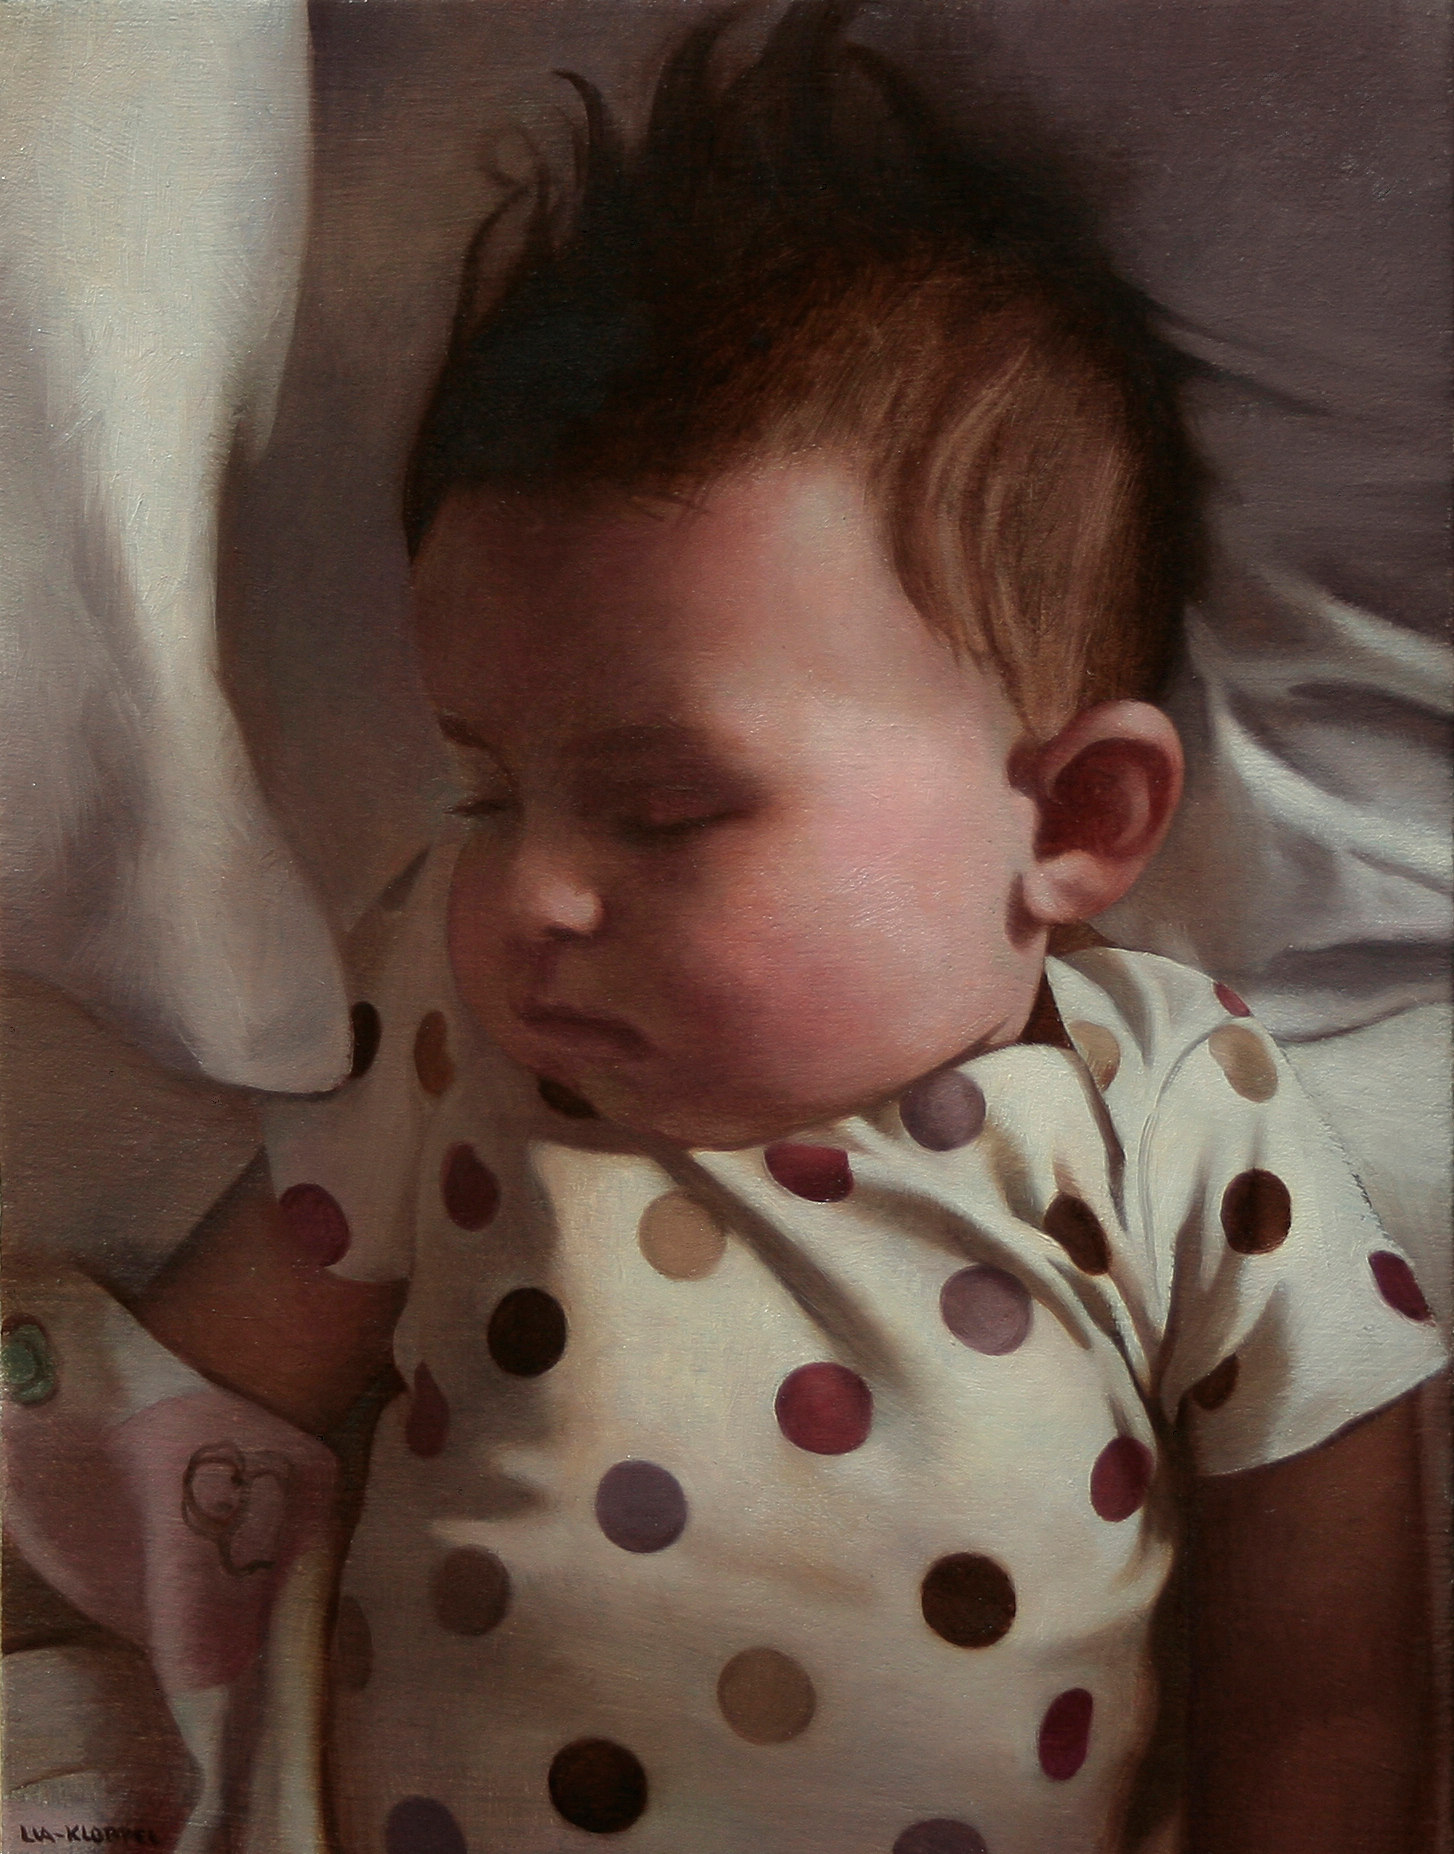   Isabella Asleep , 2011, Oil on linen, 11 x 9 inches 